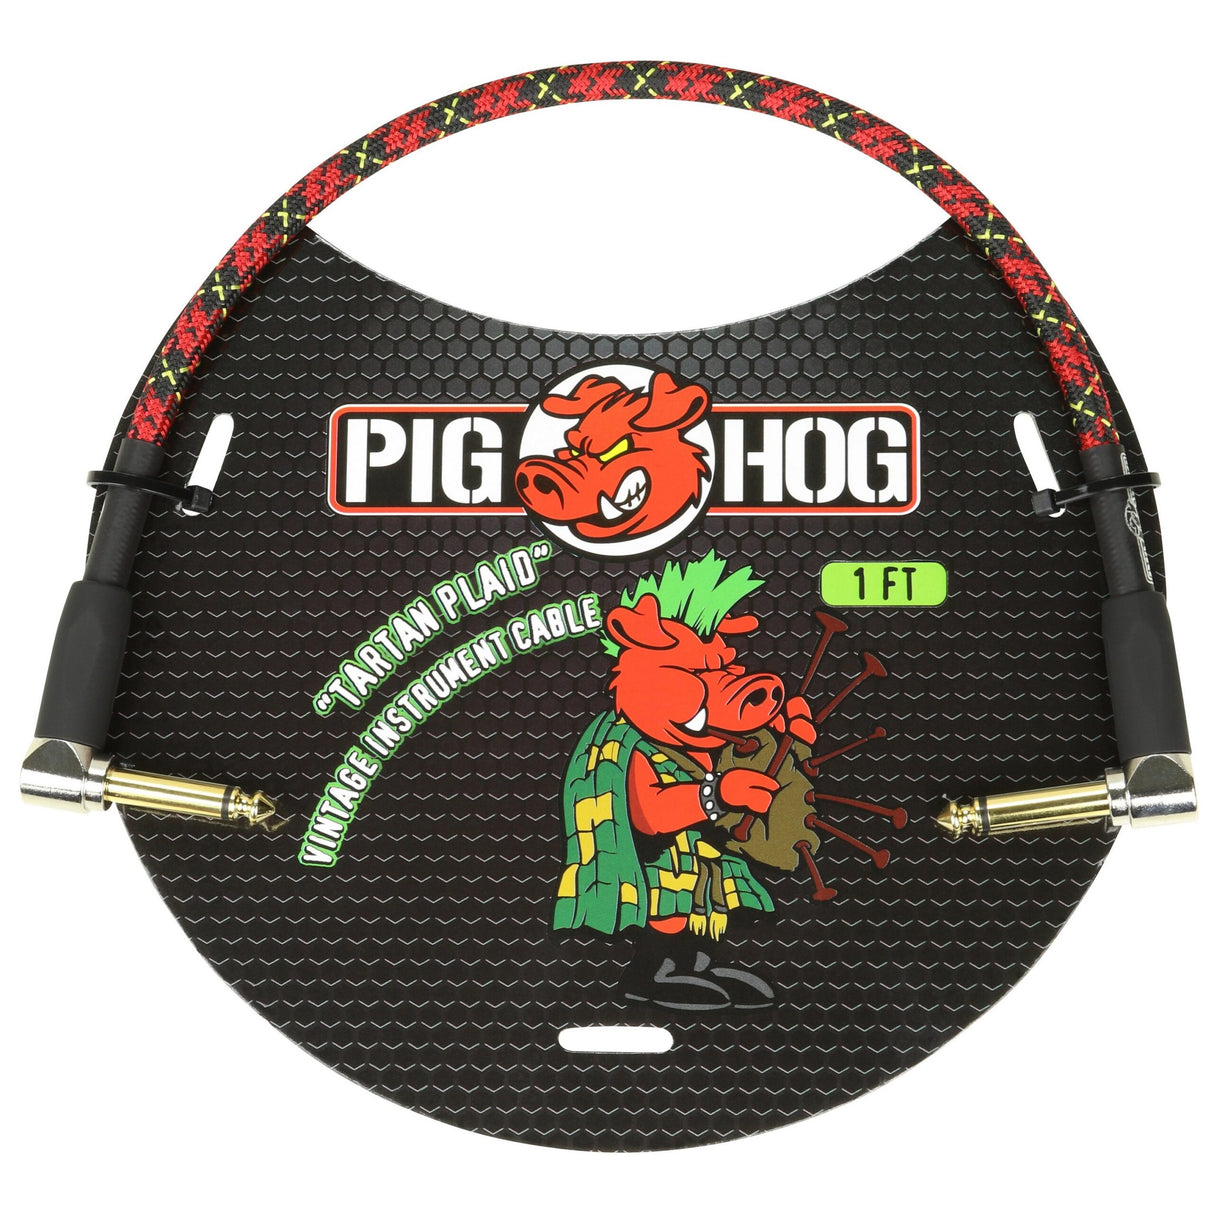 Pig Hog PCH1PLR "Tartan Plaid" 1ft Right Angled Patch Cables